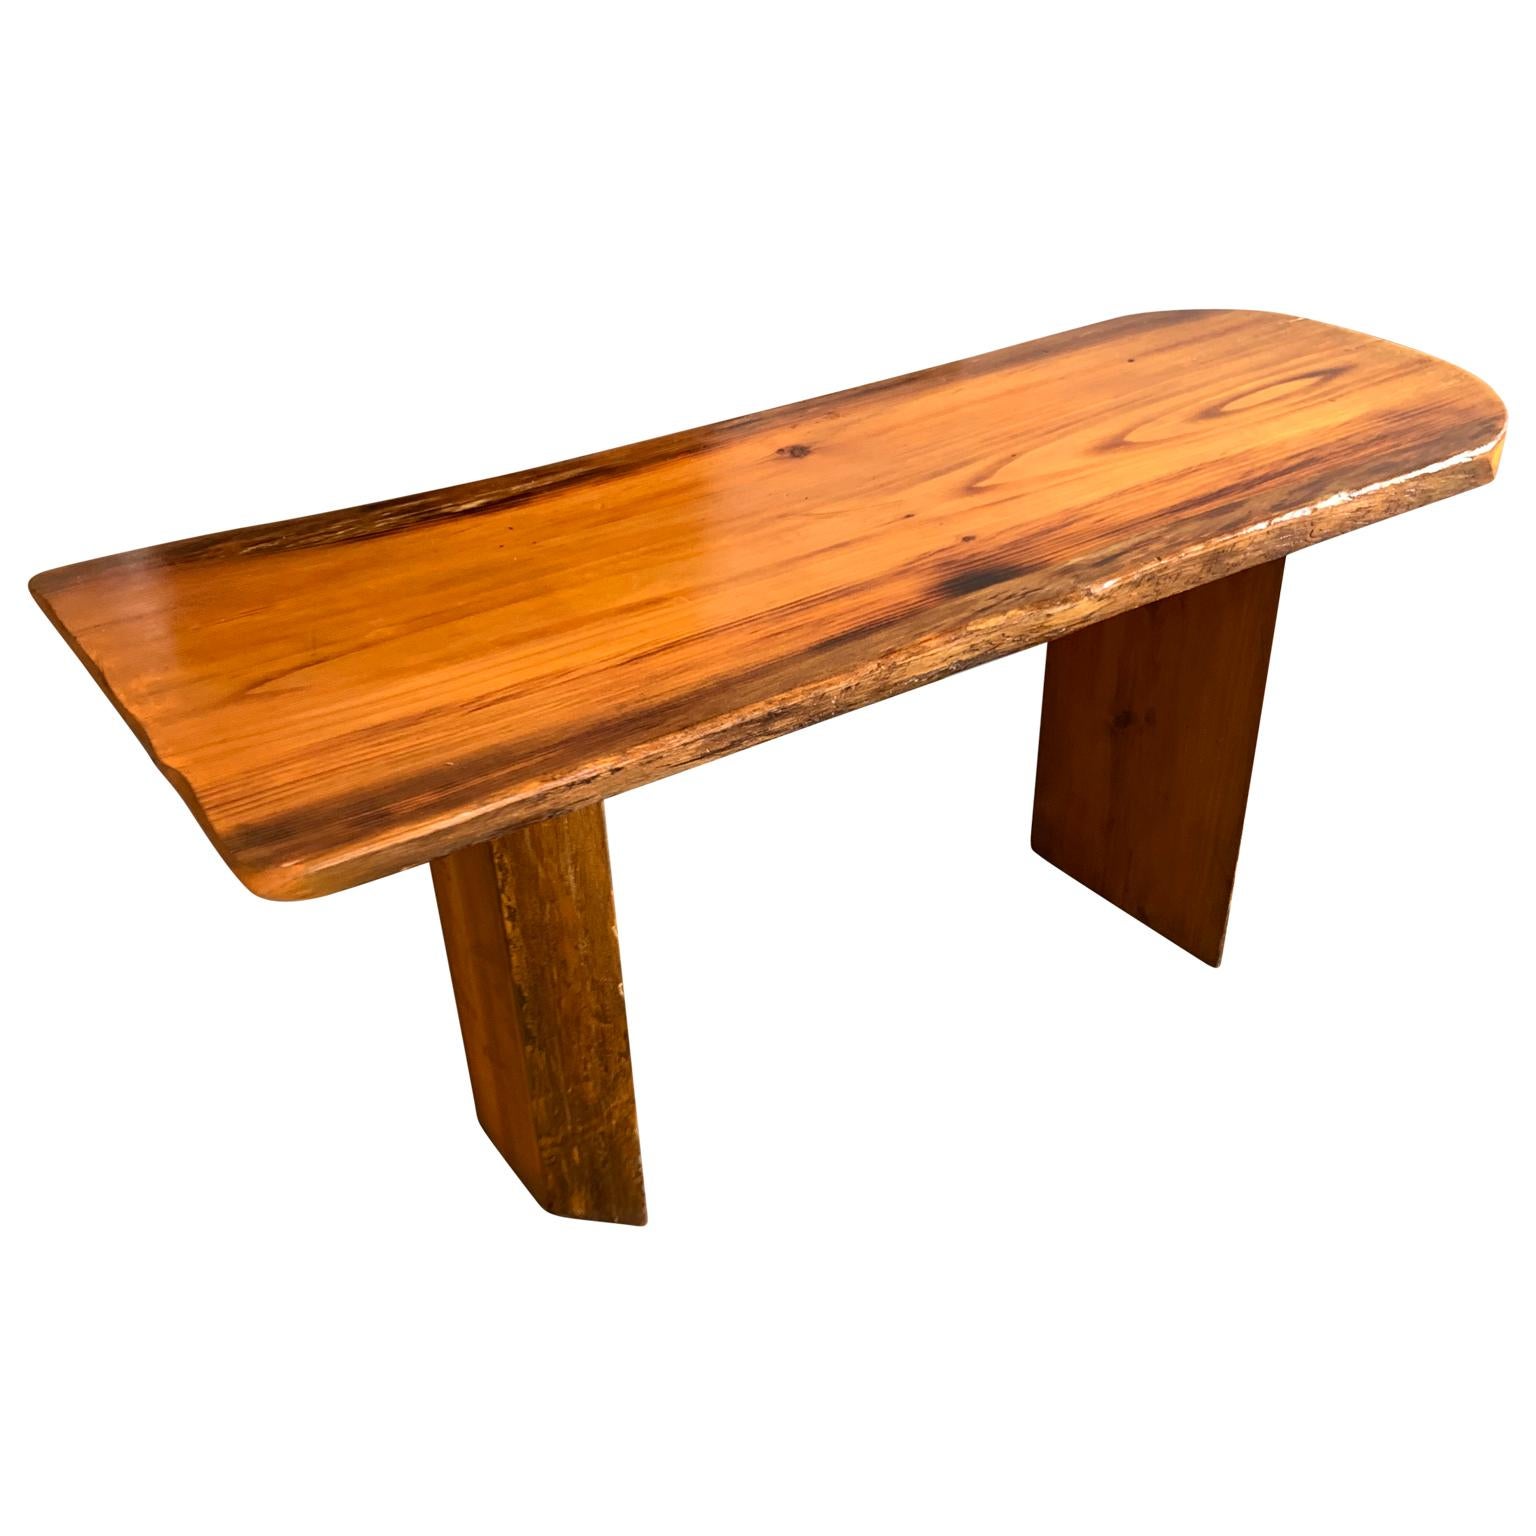 Folk Art Small Californian Live Edge Bench in Solid Wood